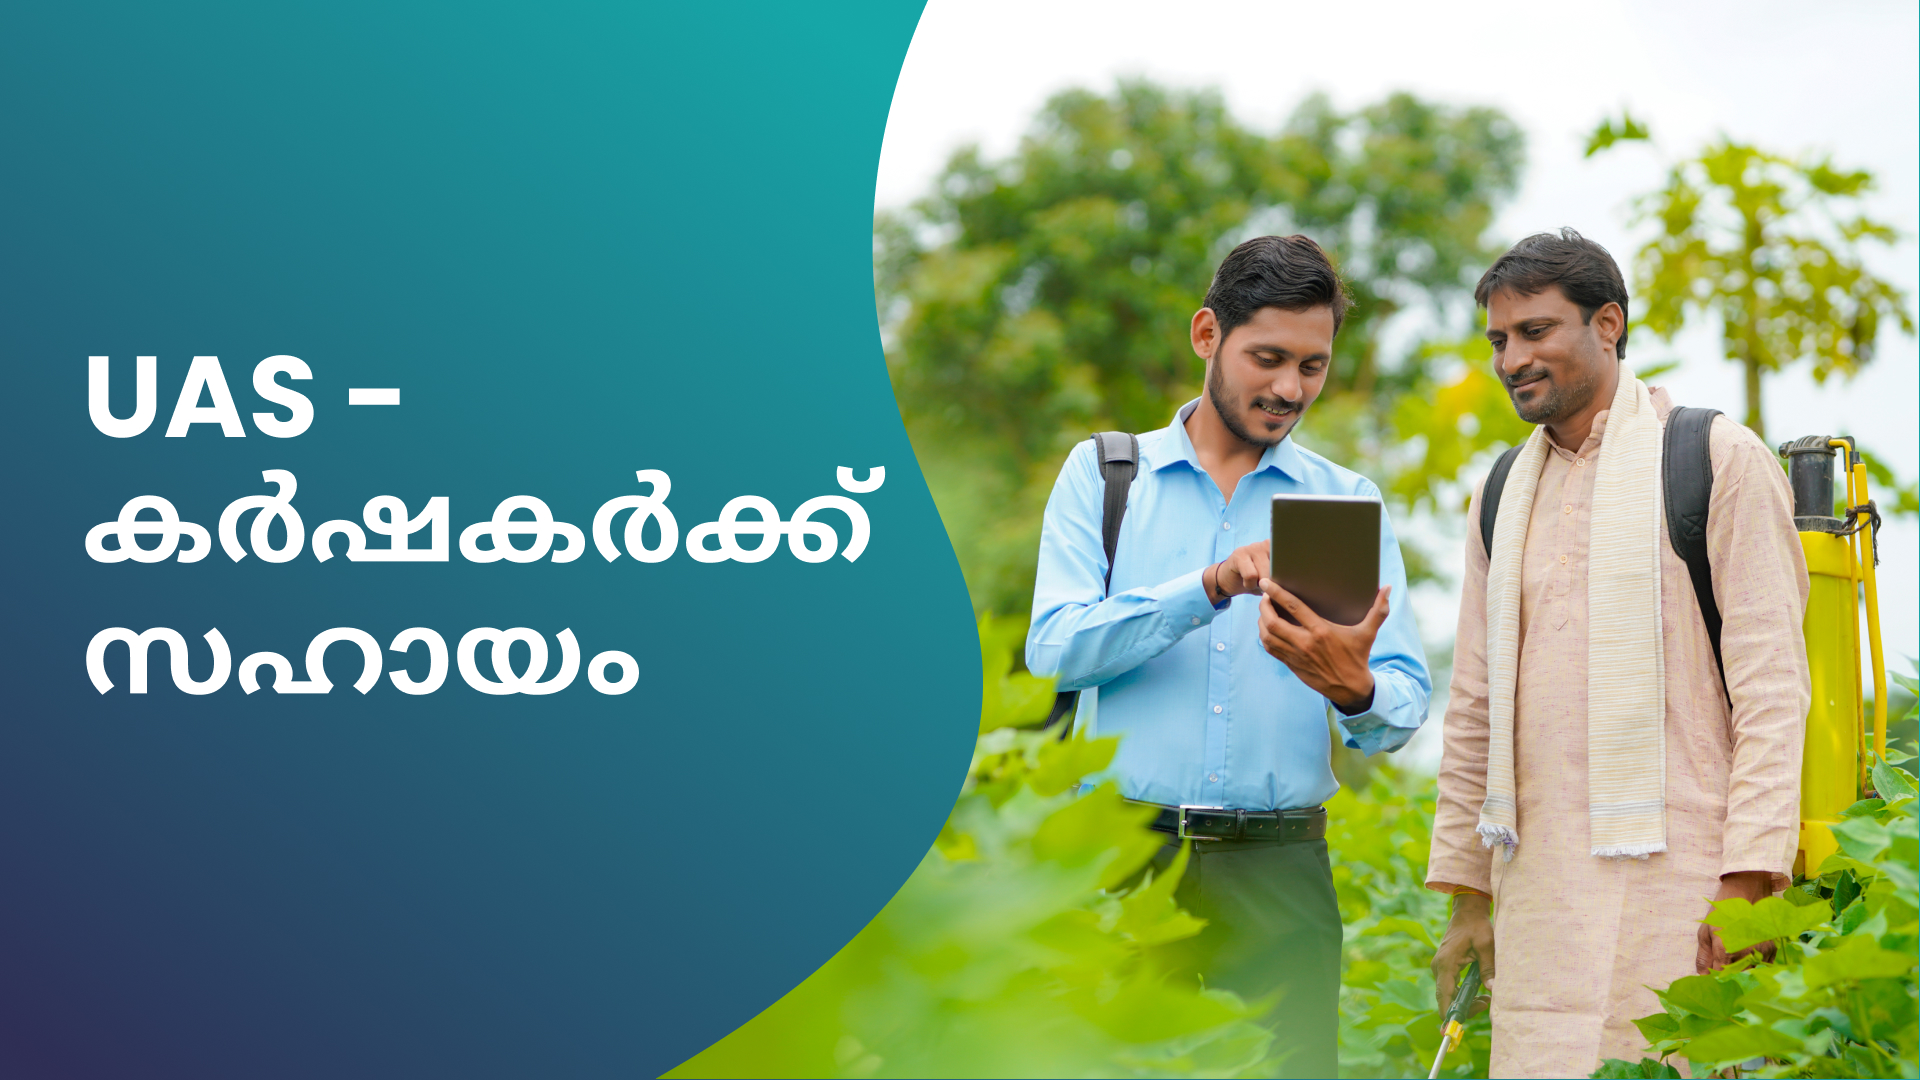 Course Trailer: How Farmers Can Benefit From The University of Agricultural Science (UAS)?. Watch to know more.